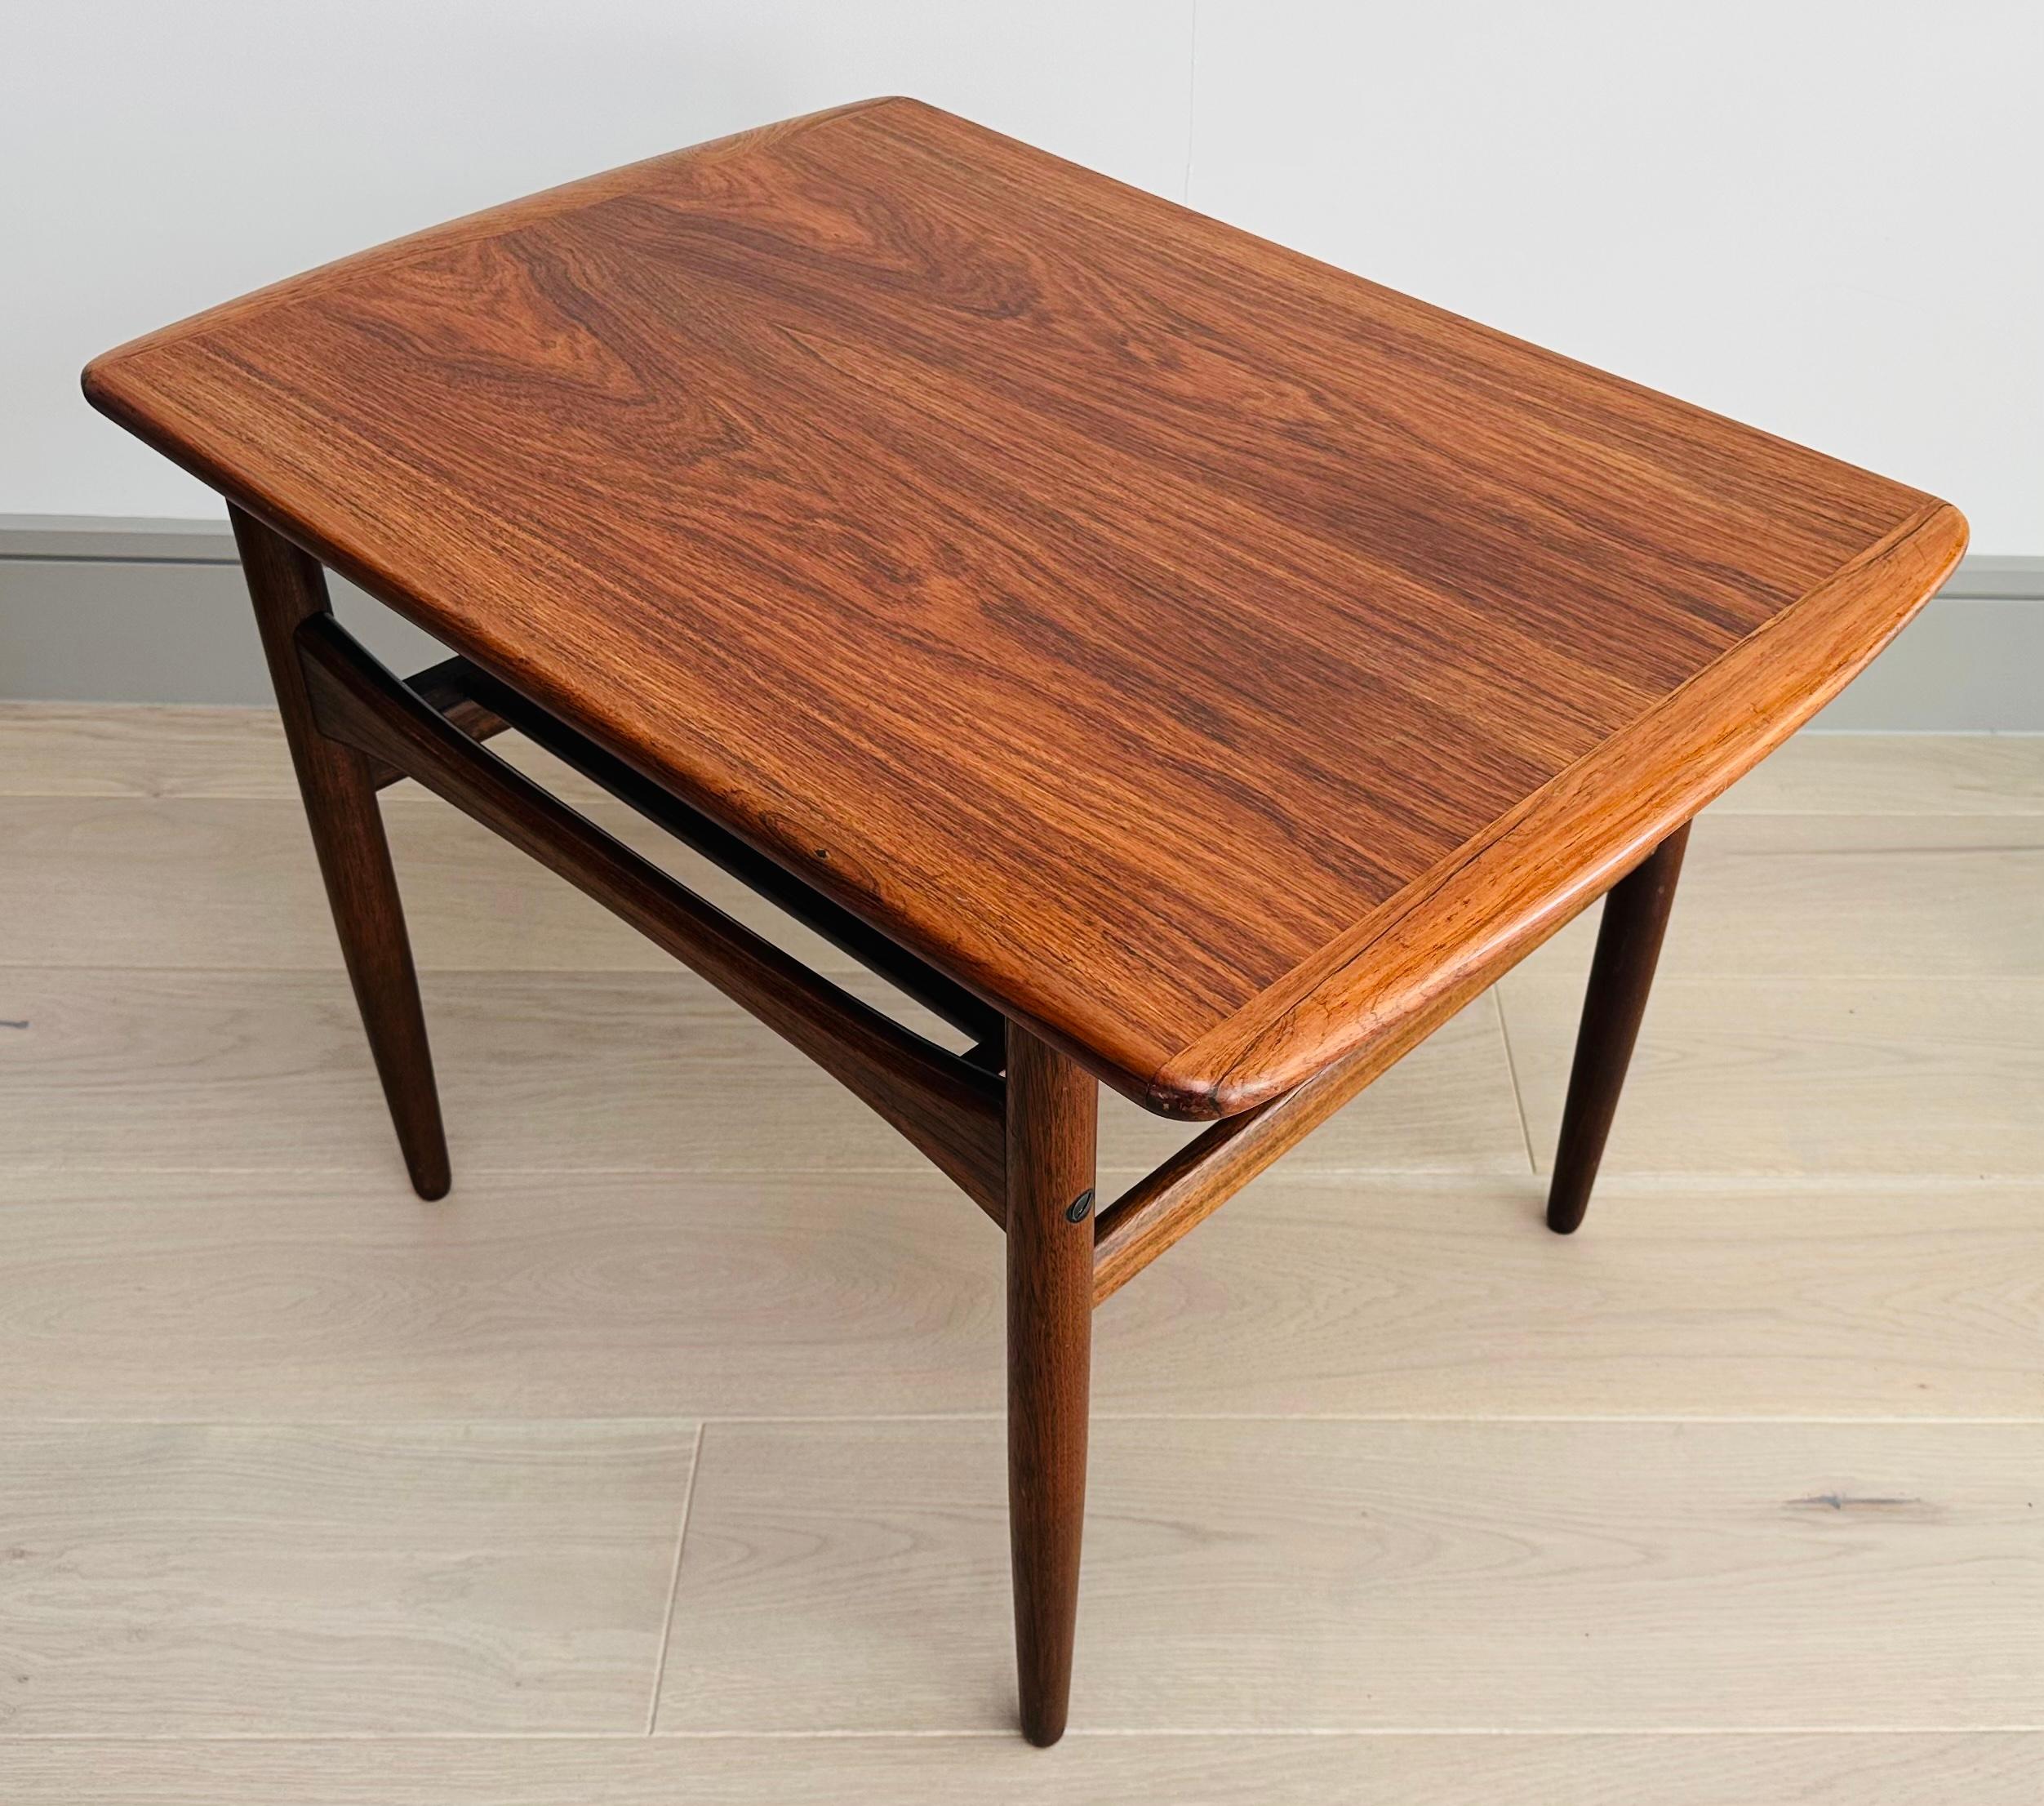 A small Danish rosewood coffee or side table which was manufactured by Arrebo Møbler and designed by Robert Christensen during the 1960s. An excellent example of Danish design with beautiful grain and patina.  The table features curved edges and a